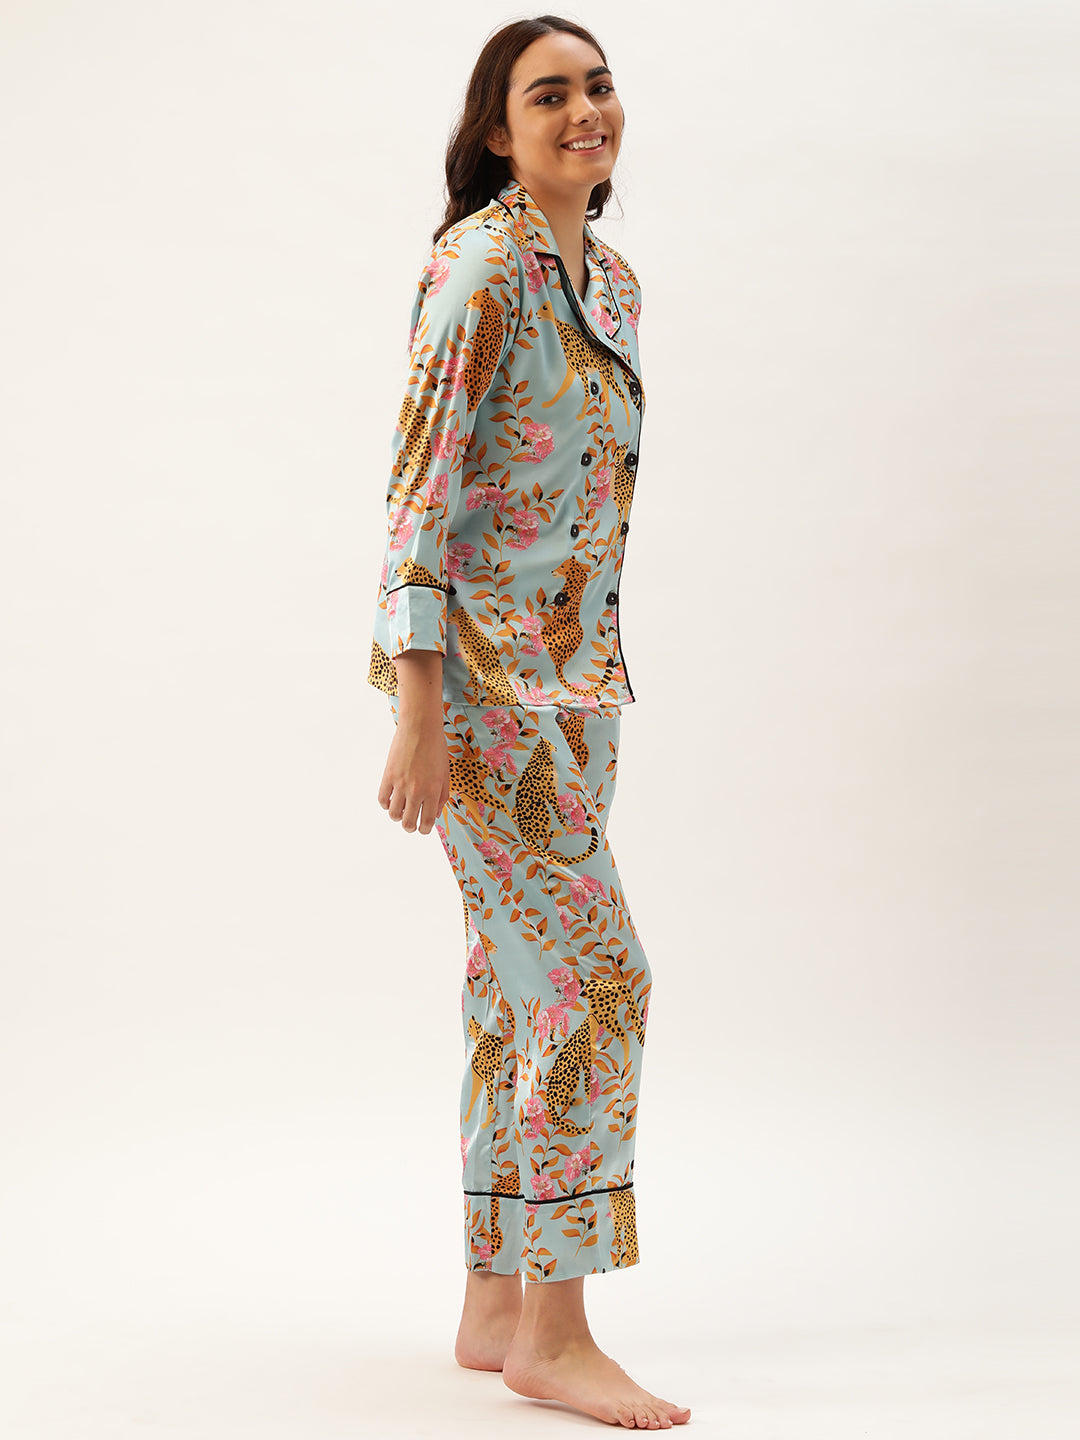 Animal Print Multi color Women Button Up Nightsuit